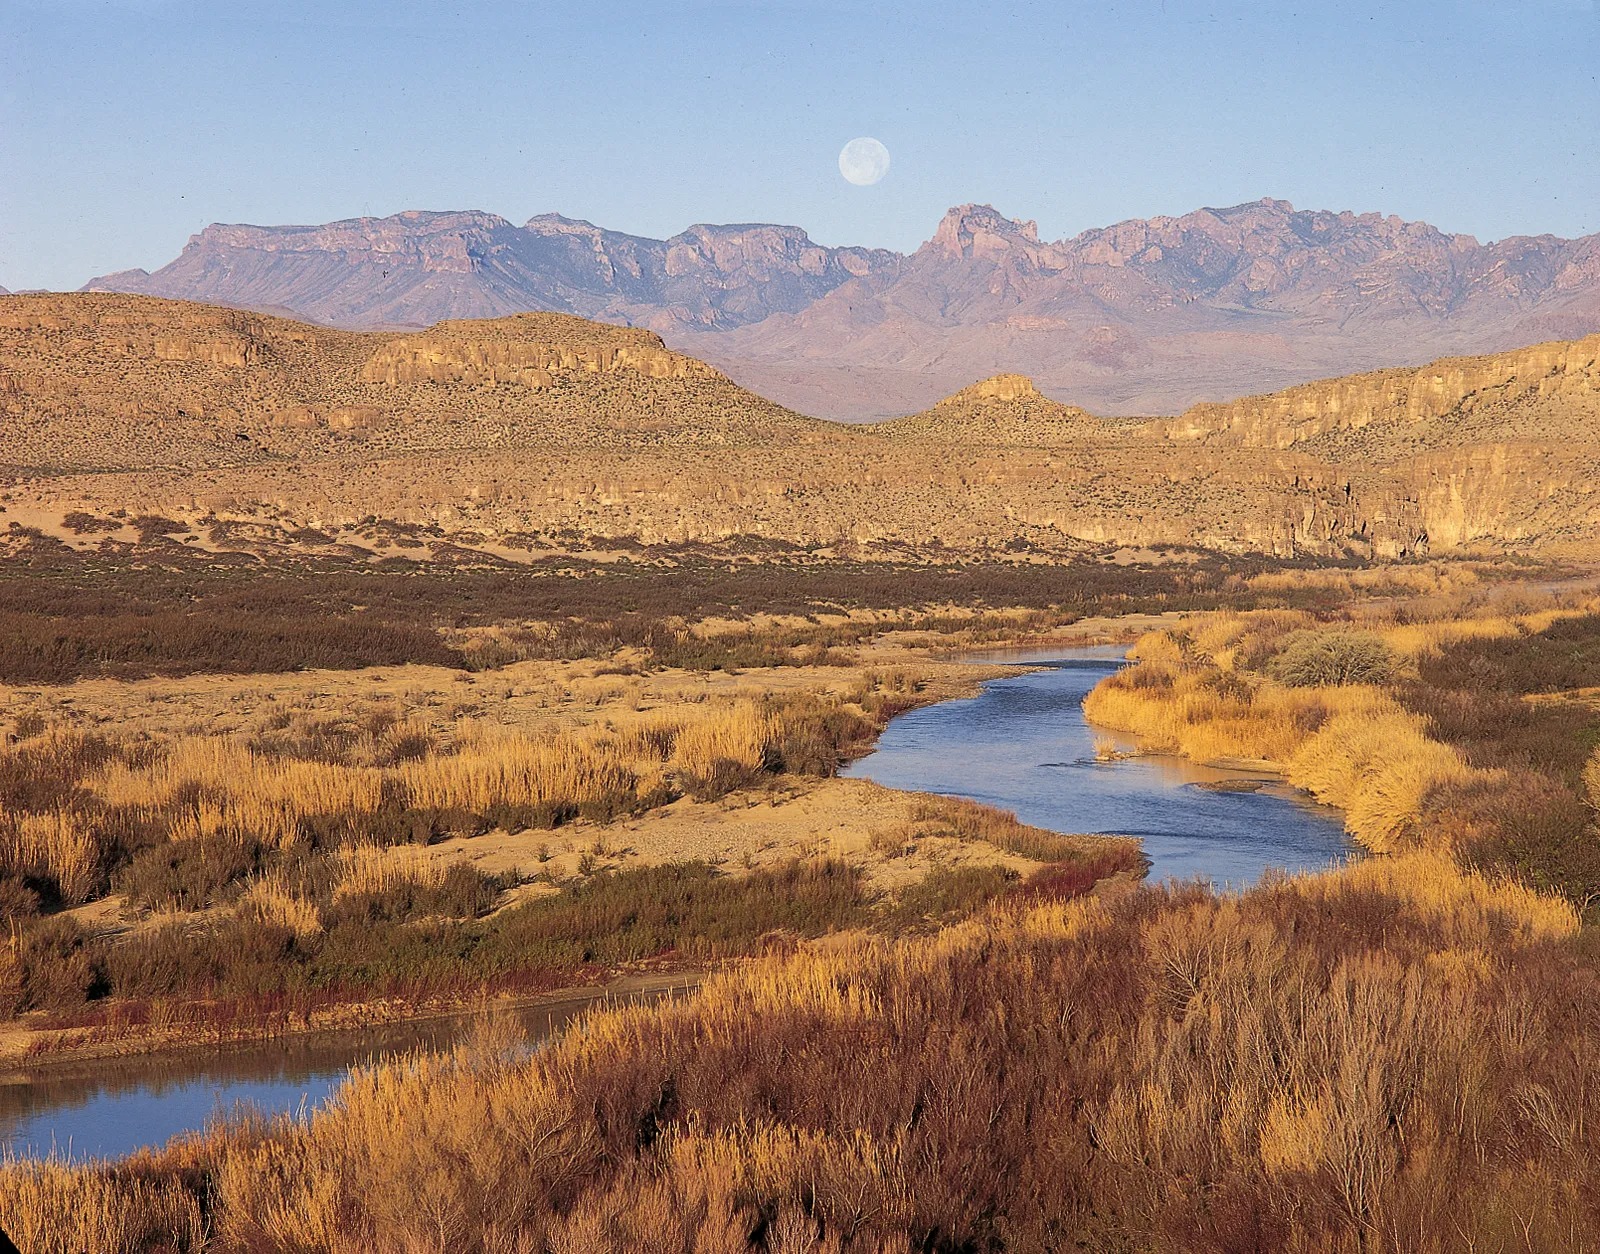 It’s Time to Take a Geography Test — Can You Get 18/22 on This Around the World Quiz? Rio Grande